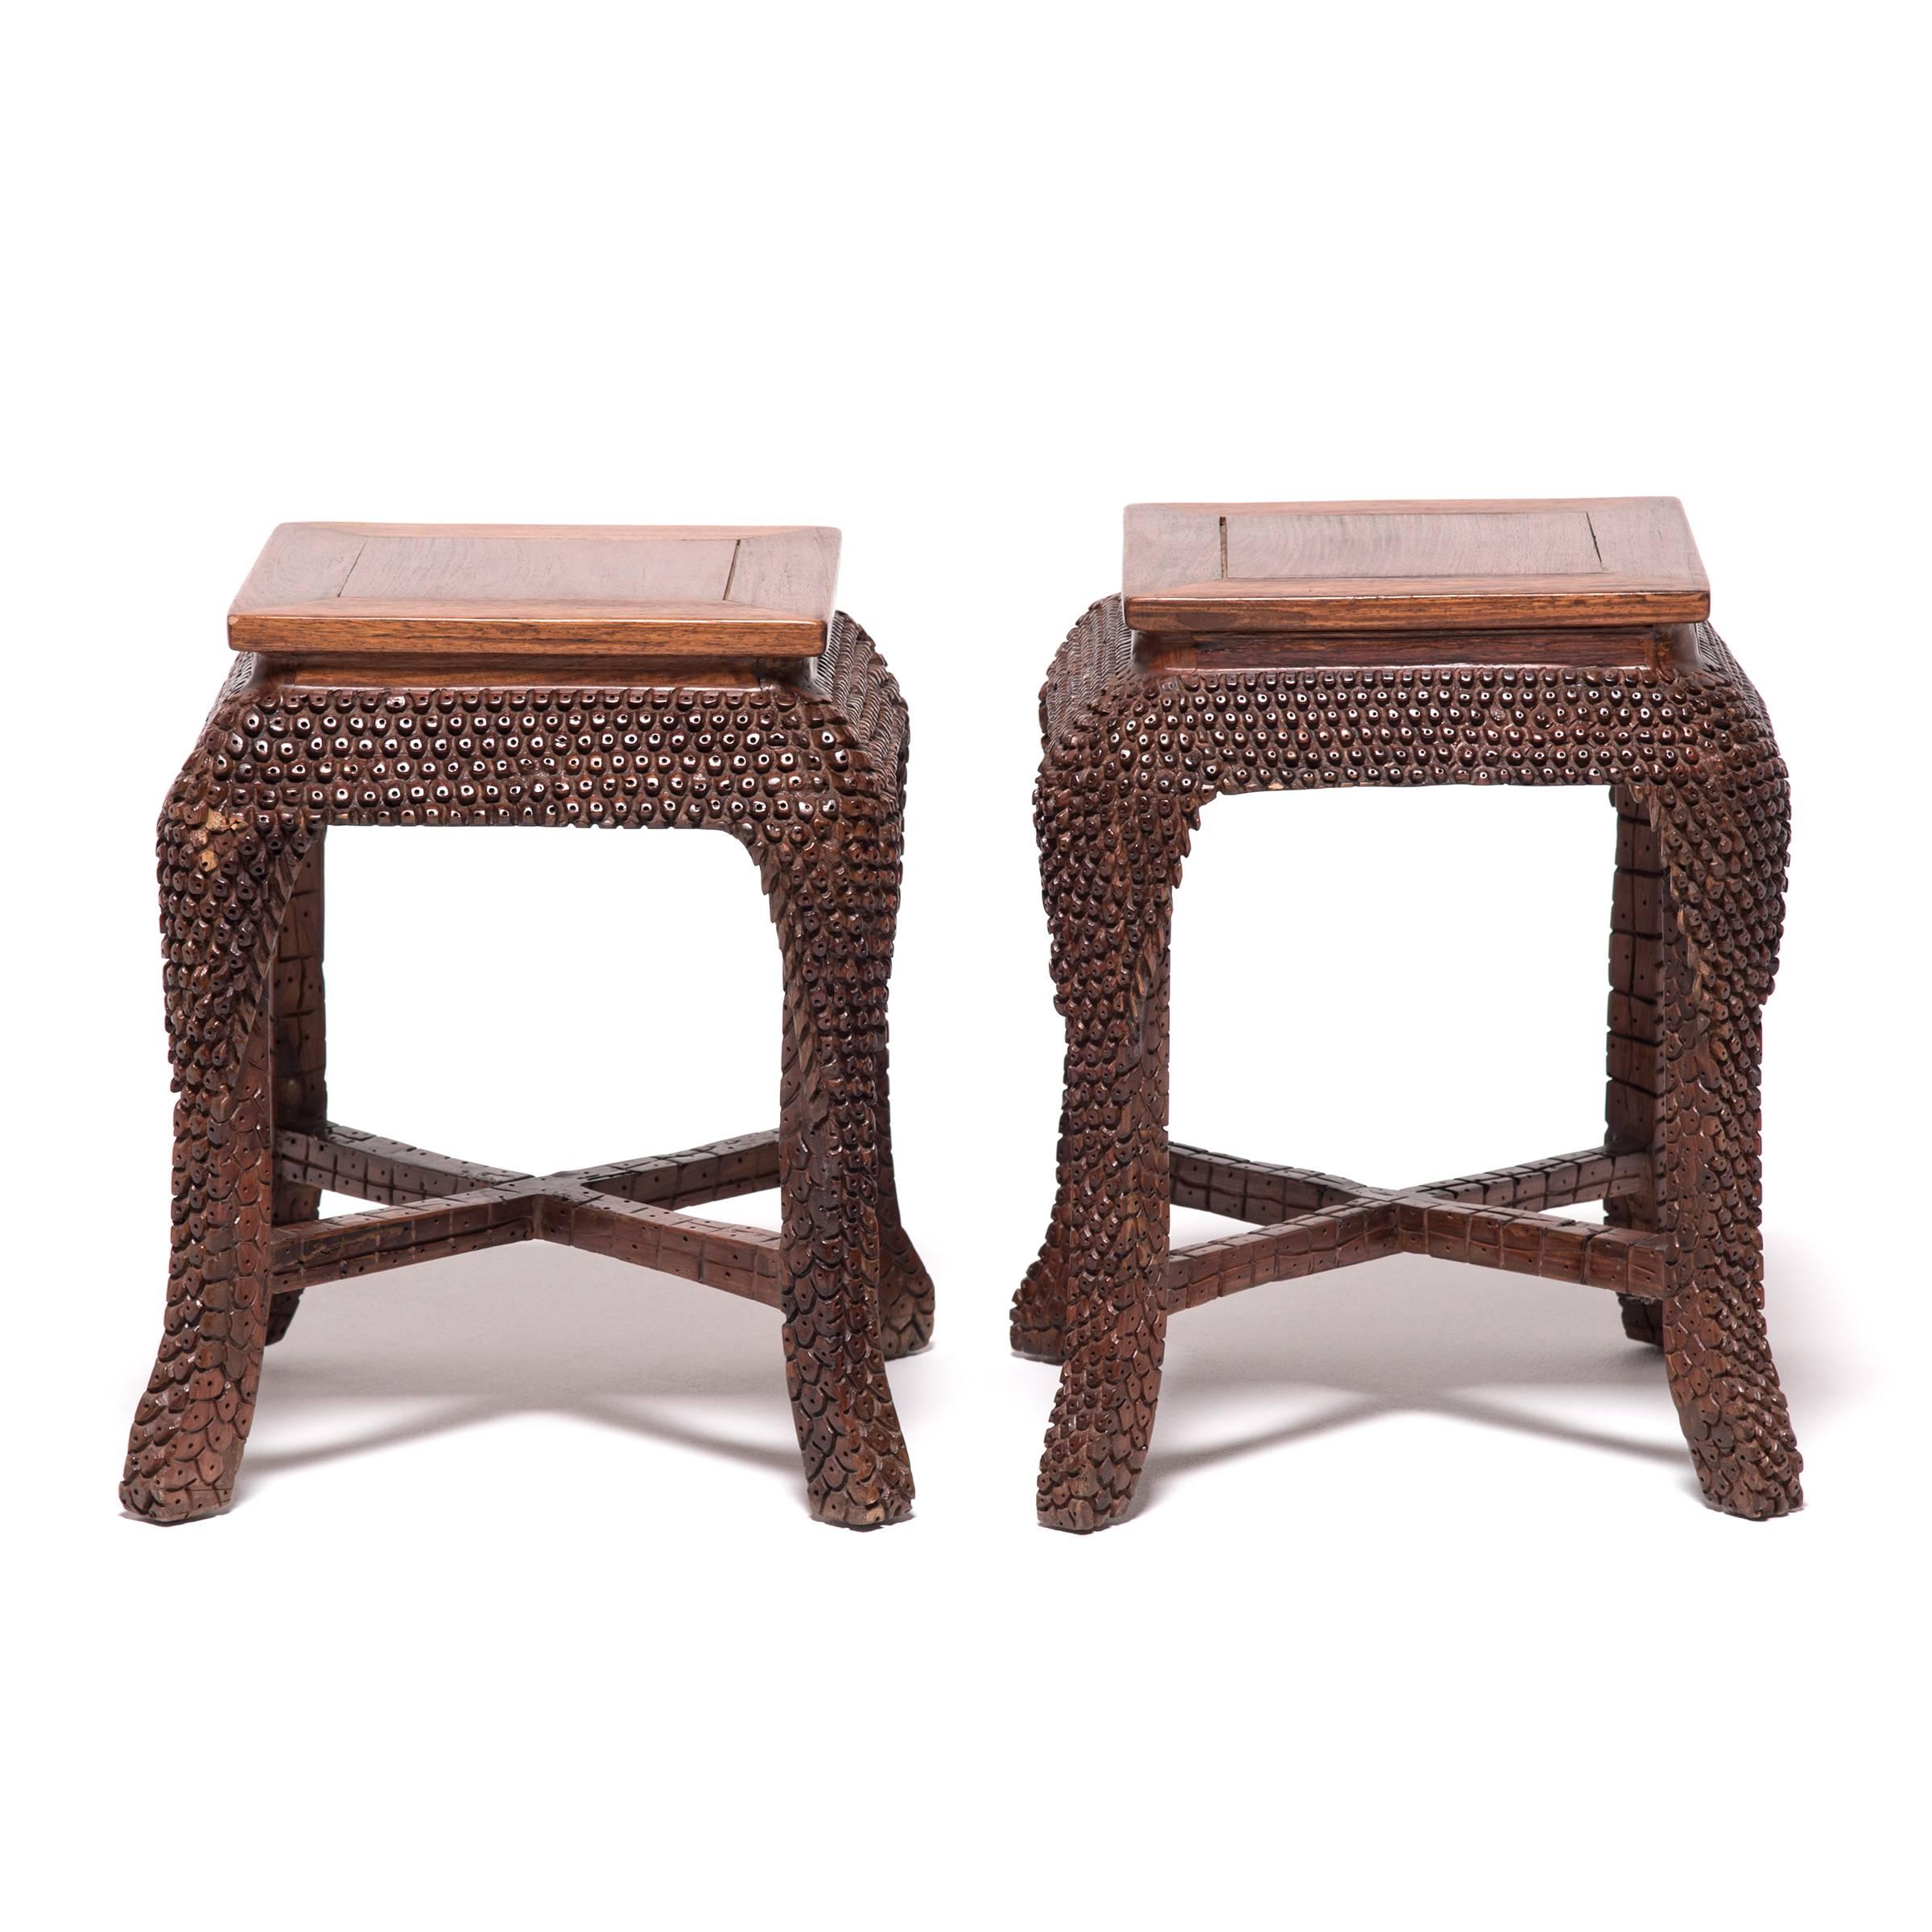 Hardwood Chinese Dragon Scale Table Set with Square Stools, c. 1900 For Sale